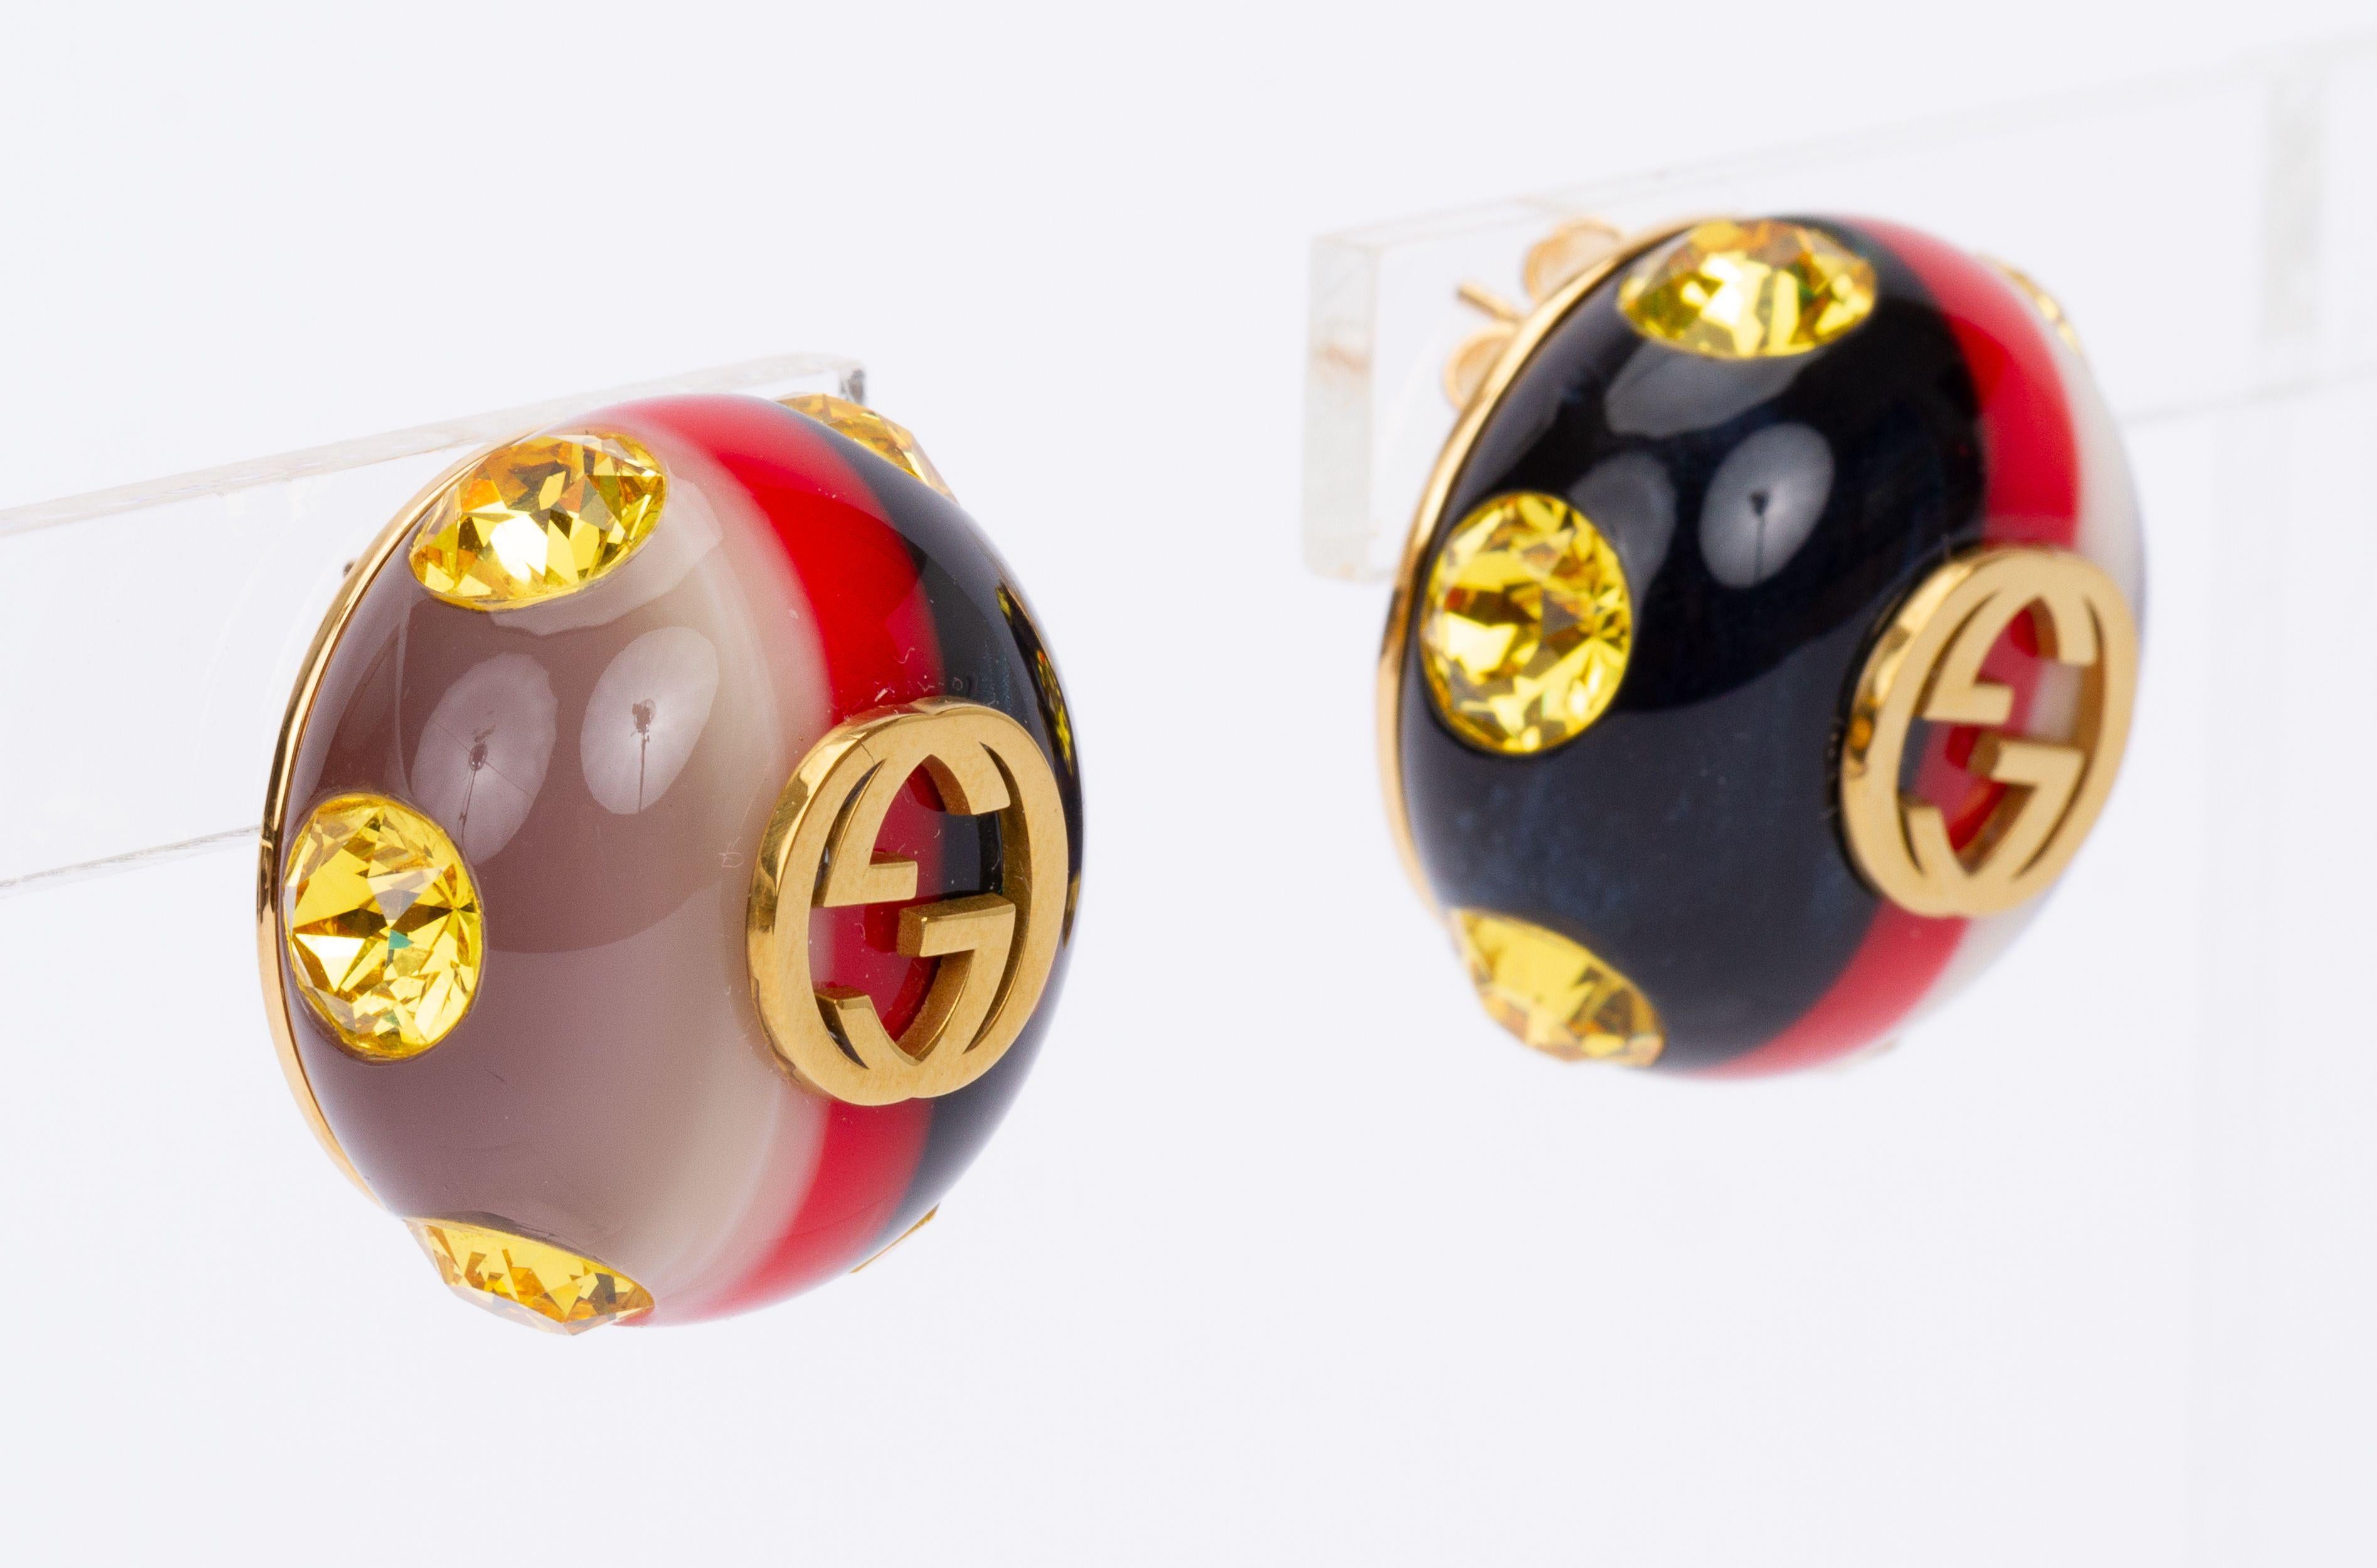 Round Gucci earrings with the GG logo in the center and a striped coloring surrounded by yellow crystals. They're brand new and come with the original box and dust cover.